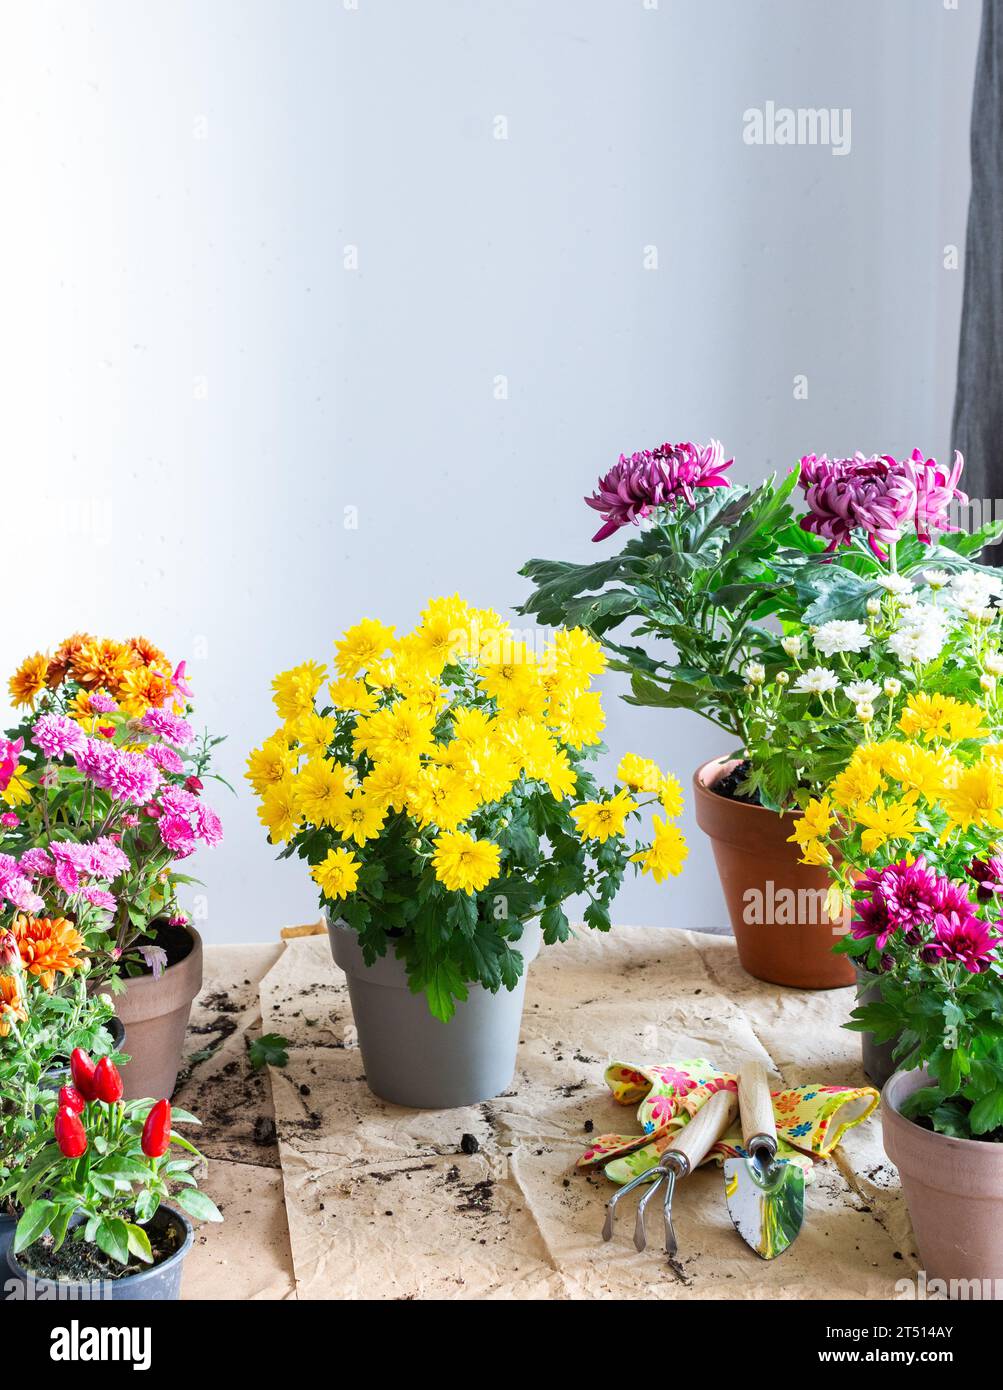 Planting fall flowers in pots for balcony or terrace, decorating your home with chrysanthemums and heather flowers Stock Photo